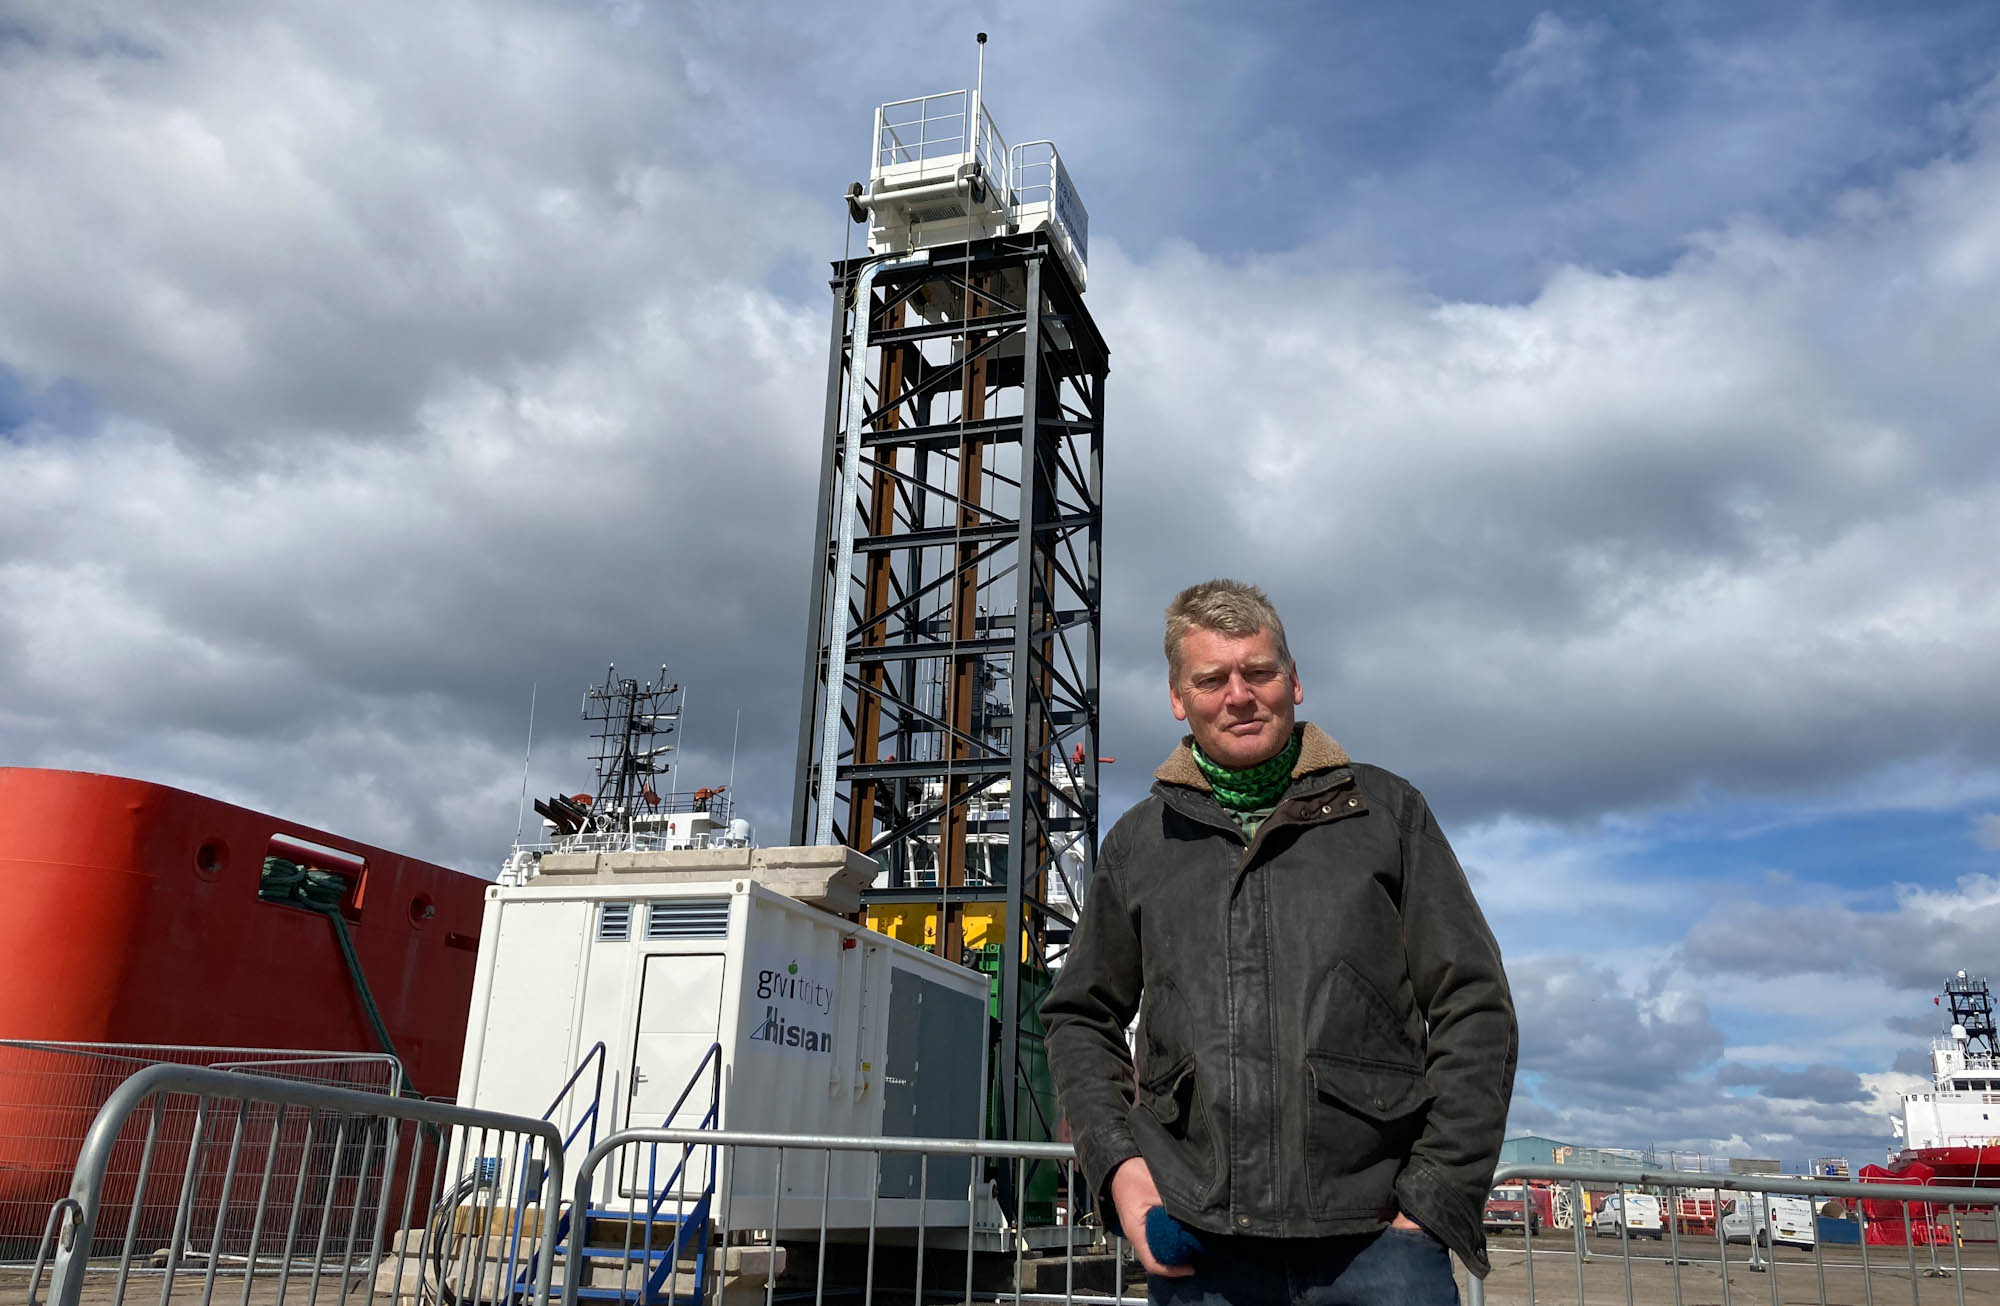 Tom Heap in front of Gravitricity tower (Image: BBC)